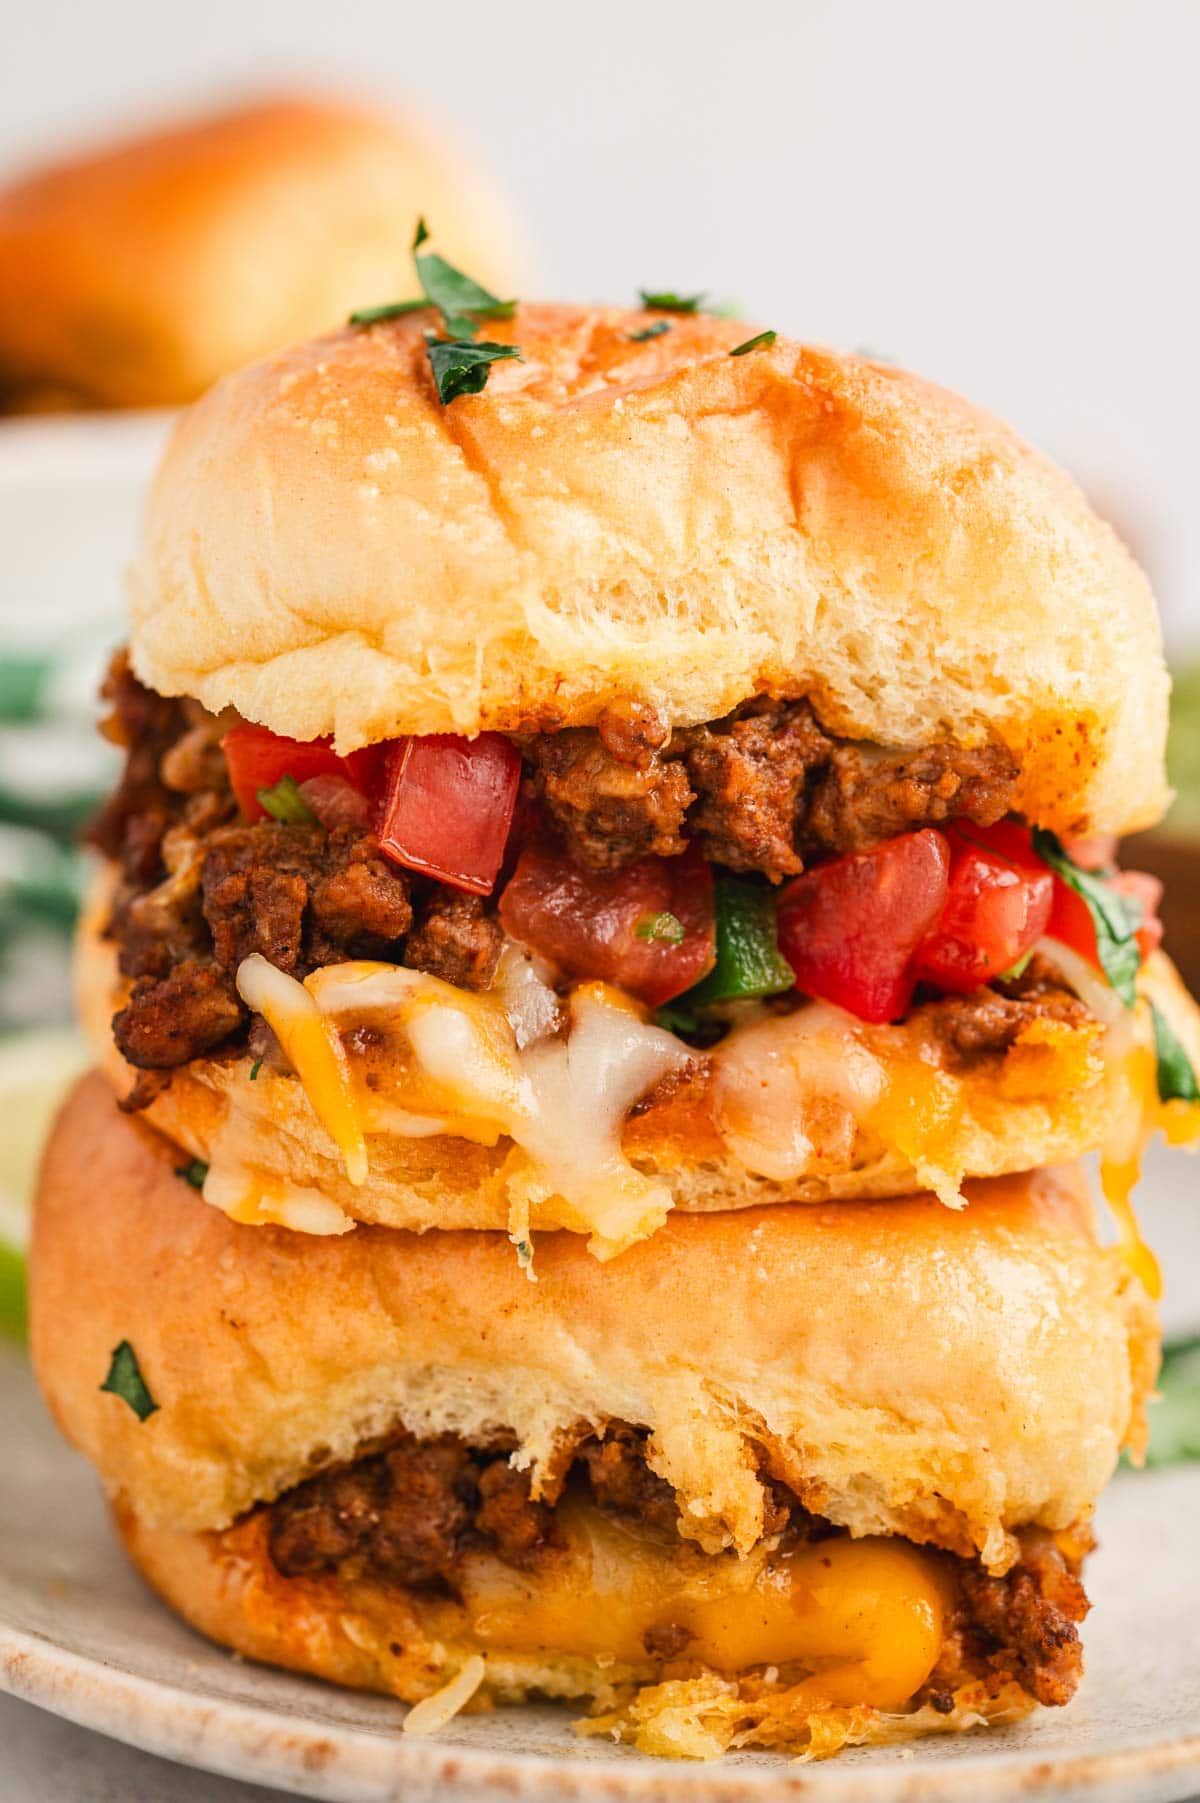 Two sliders stacked on top of each other, filled with taco meat and pico de gallo.